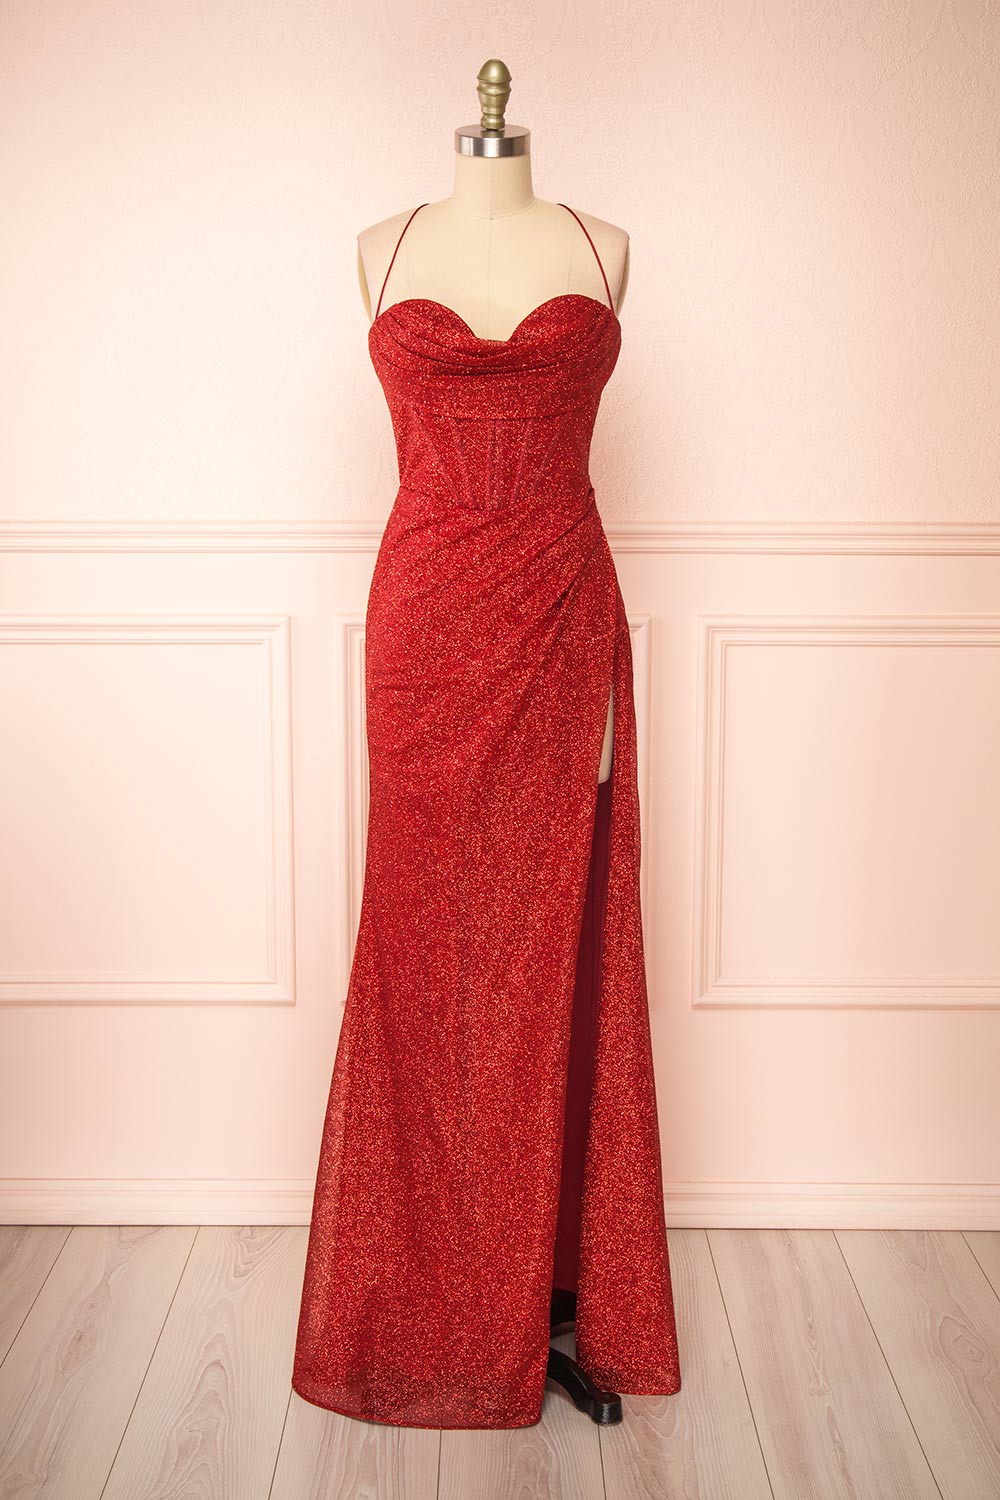 Frosti Red Sparkly Cowl Neck Maxi Dress | Boutique 1861 front view 